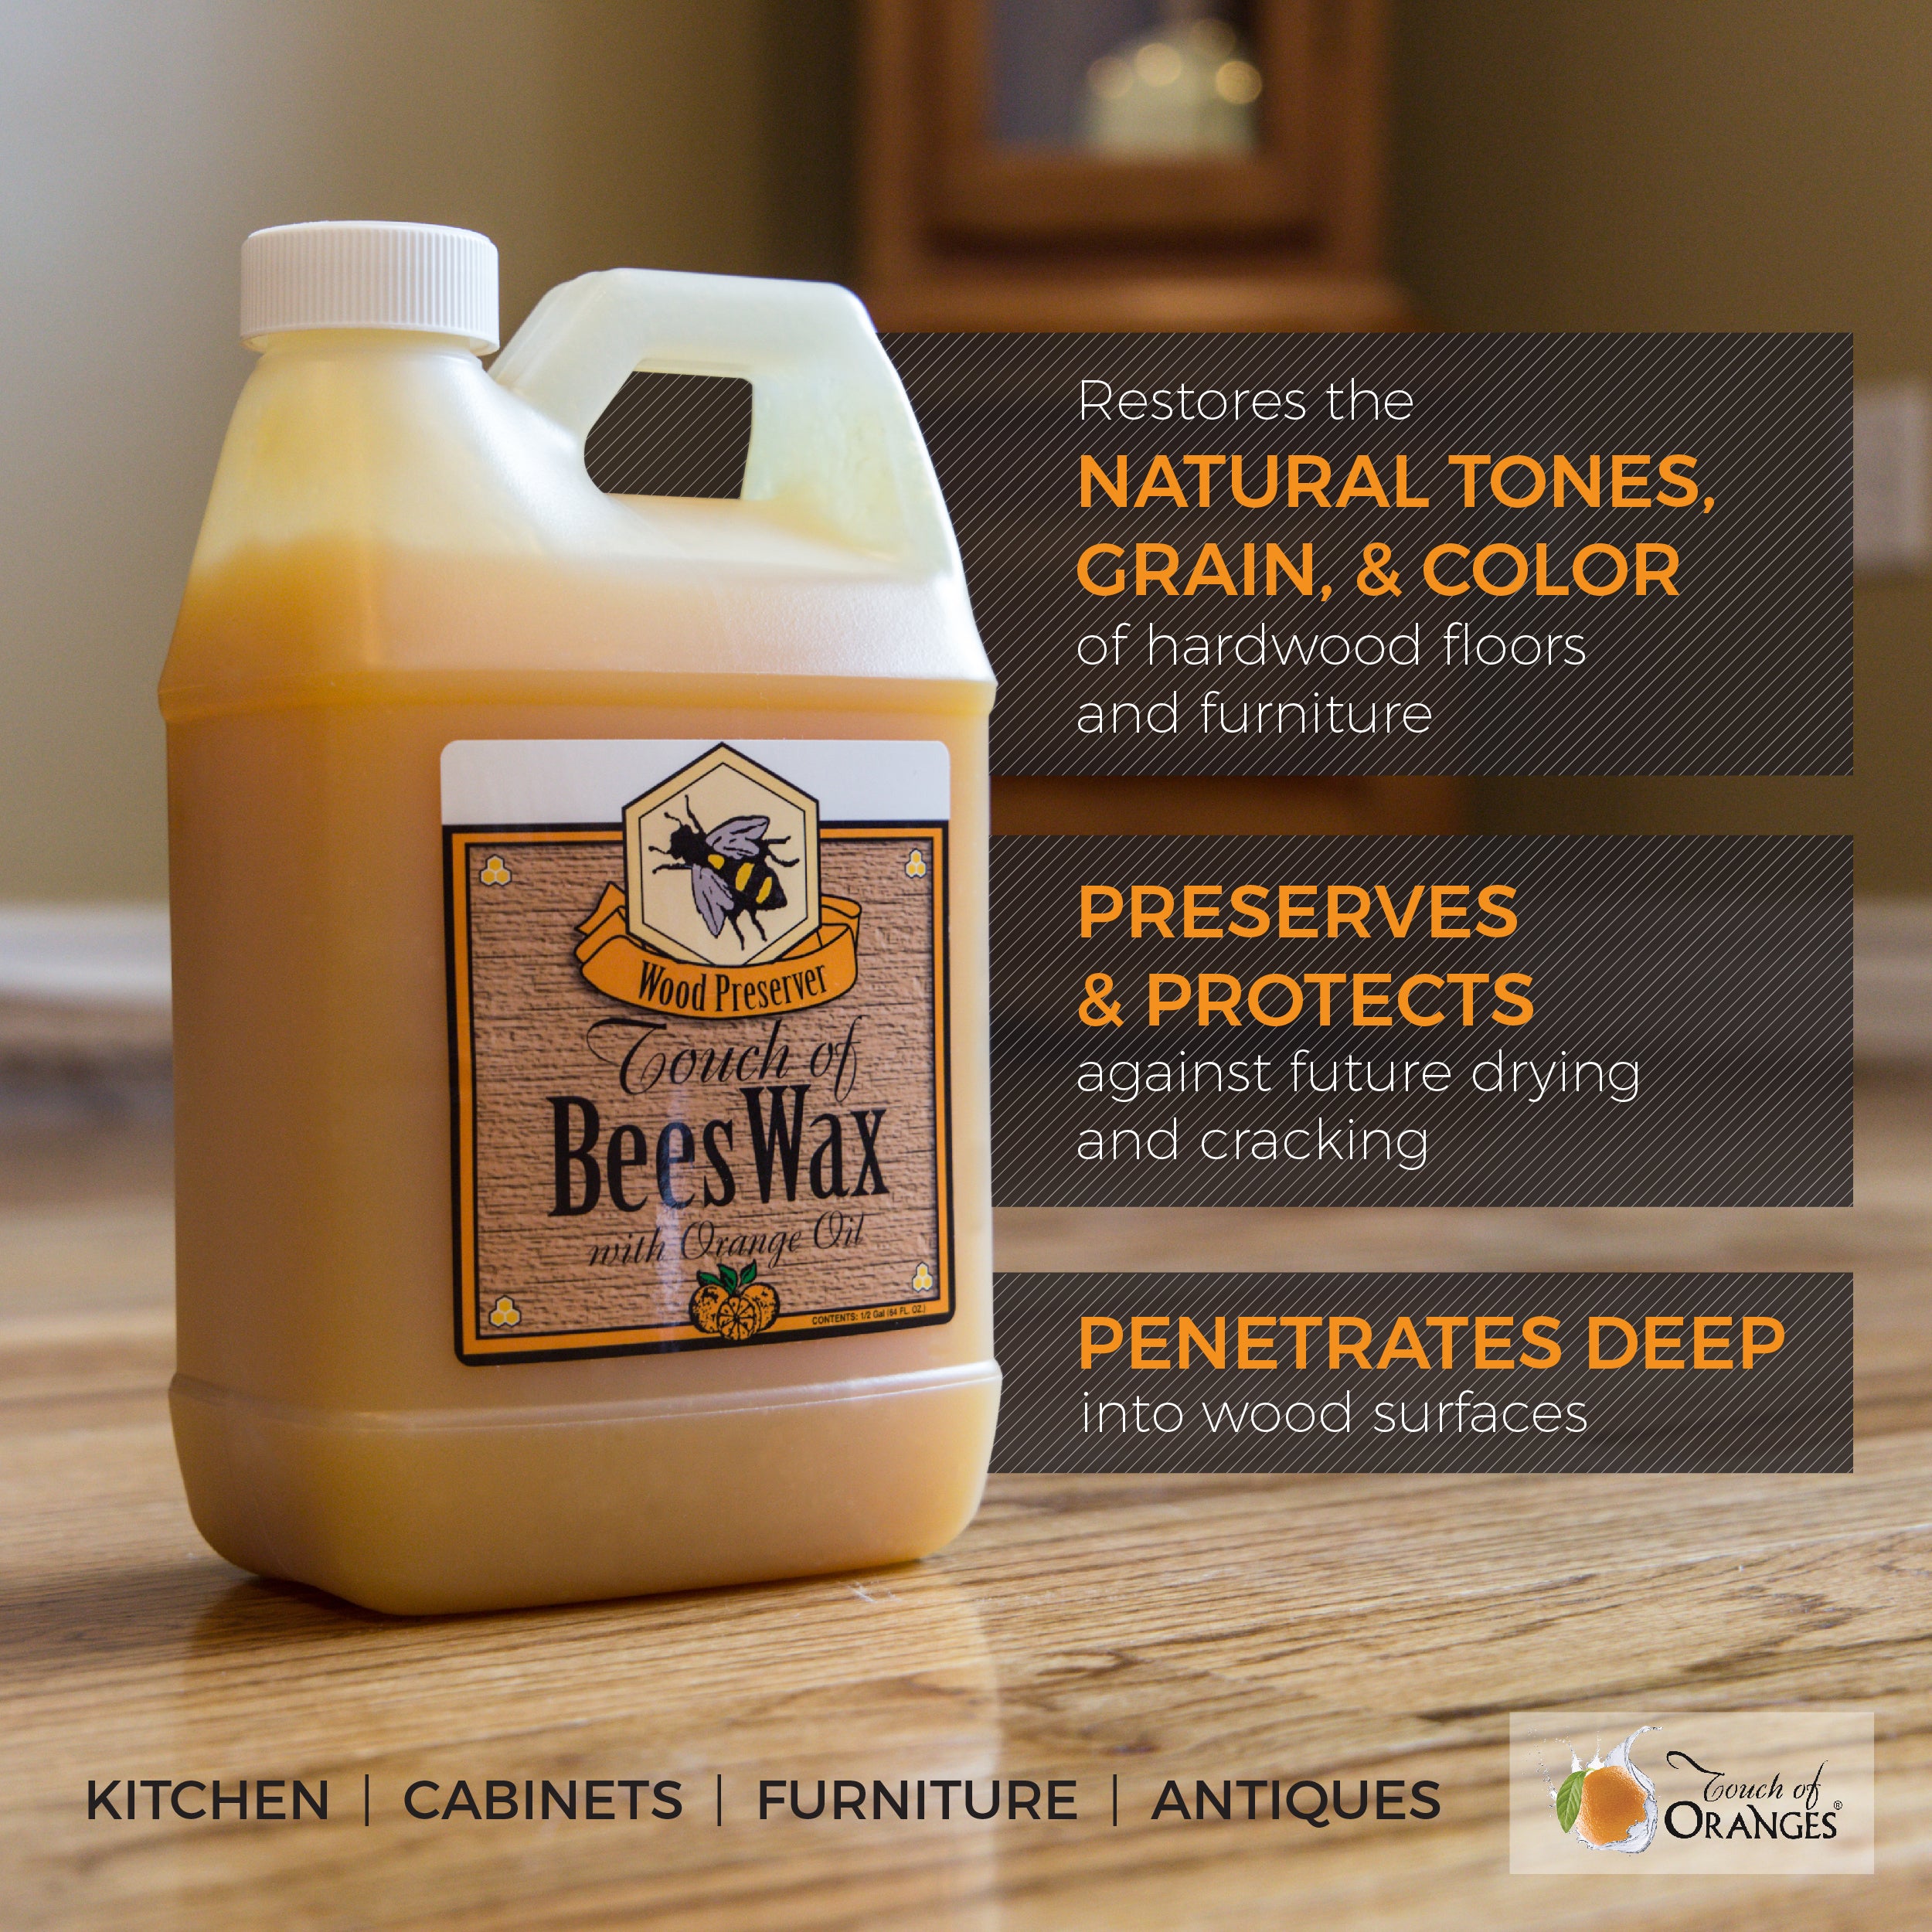 Wood Polish - Beeswax and Mineral Oil - All Natural - The Foundry Home Goods